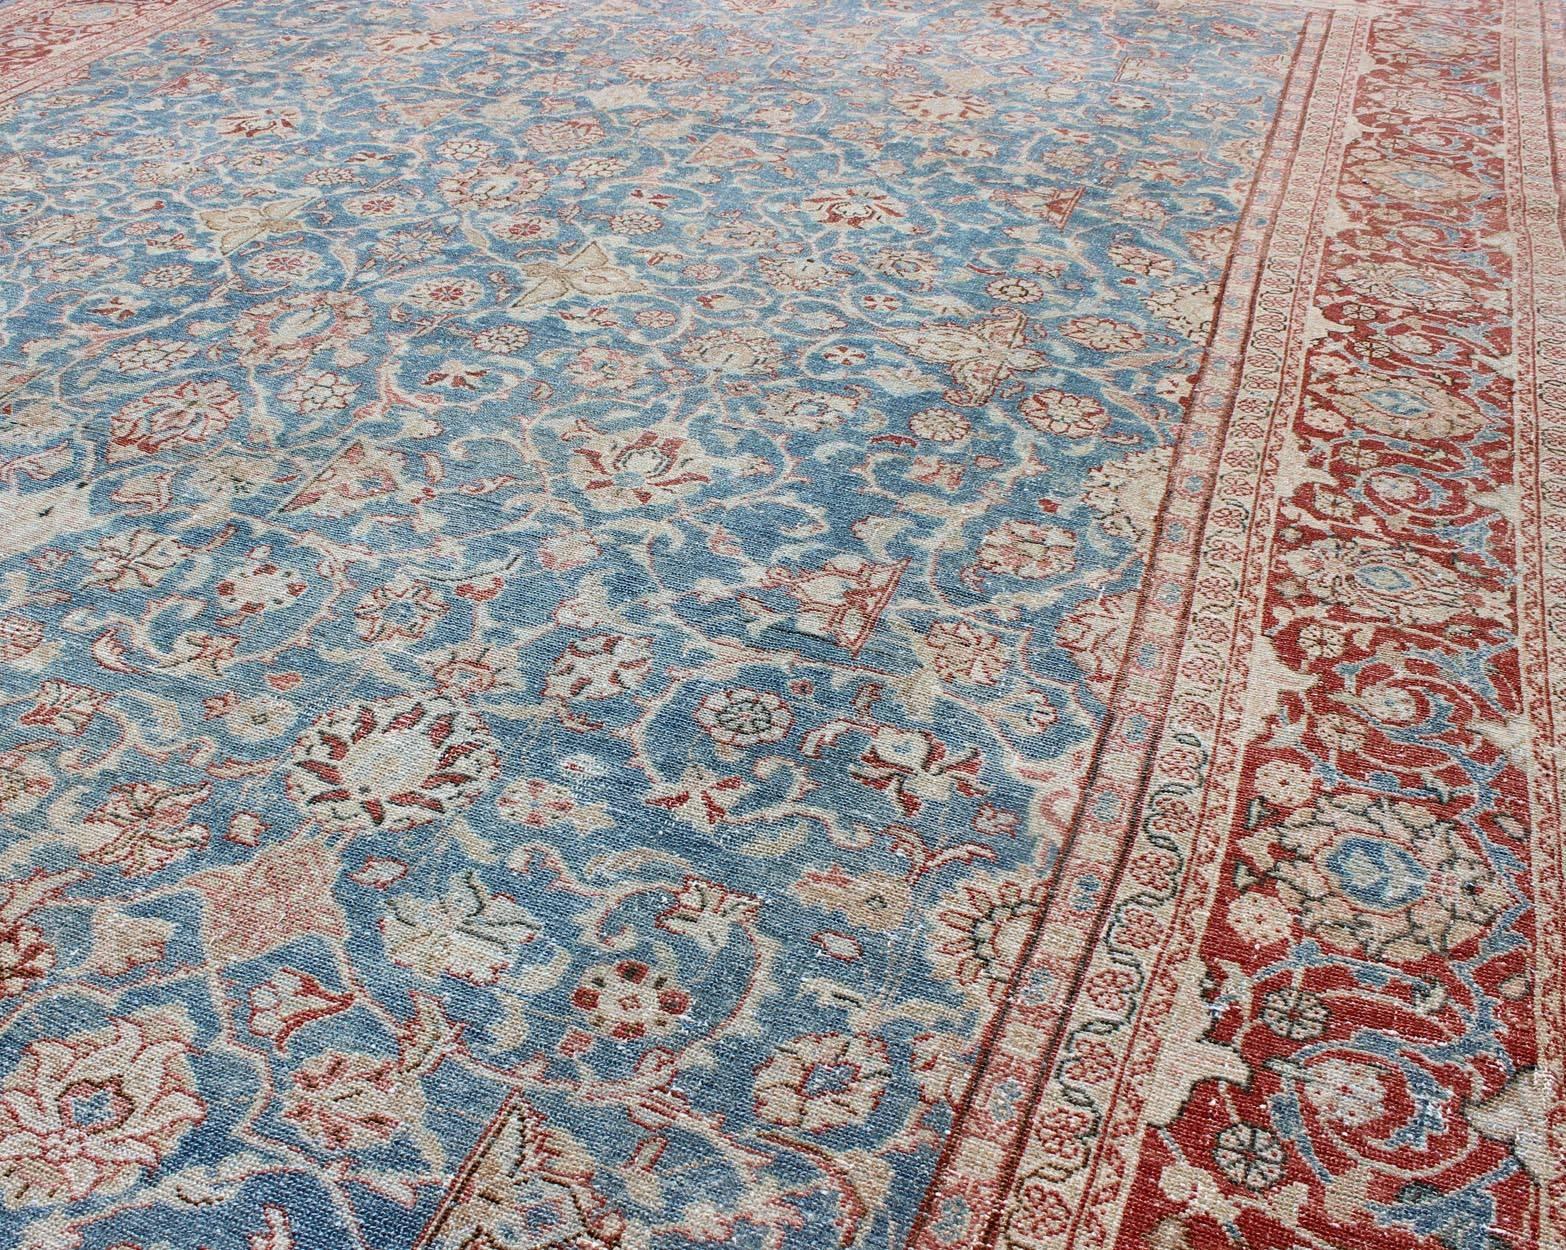 Early 20th Century Blue and Red Antique Persian Malayer Rug with All-Over Design and Ornate Borders For Sale